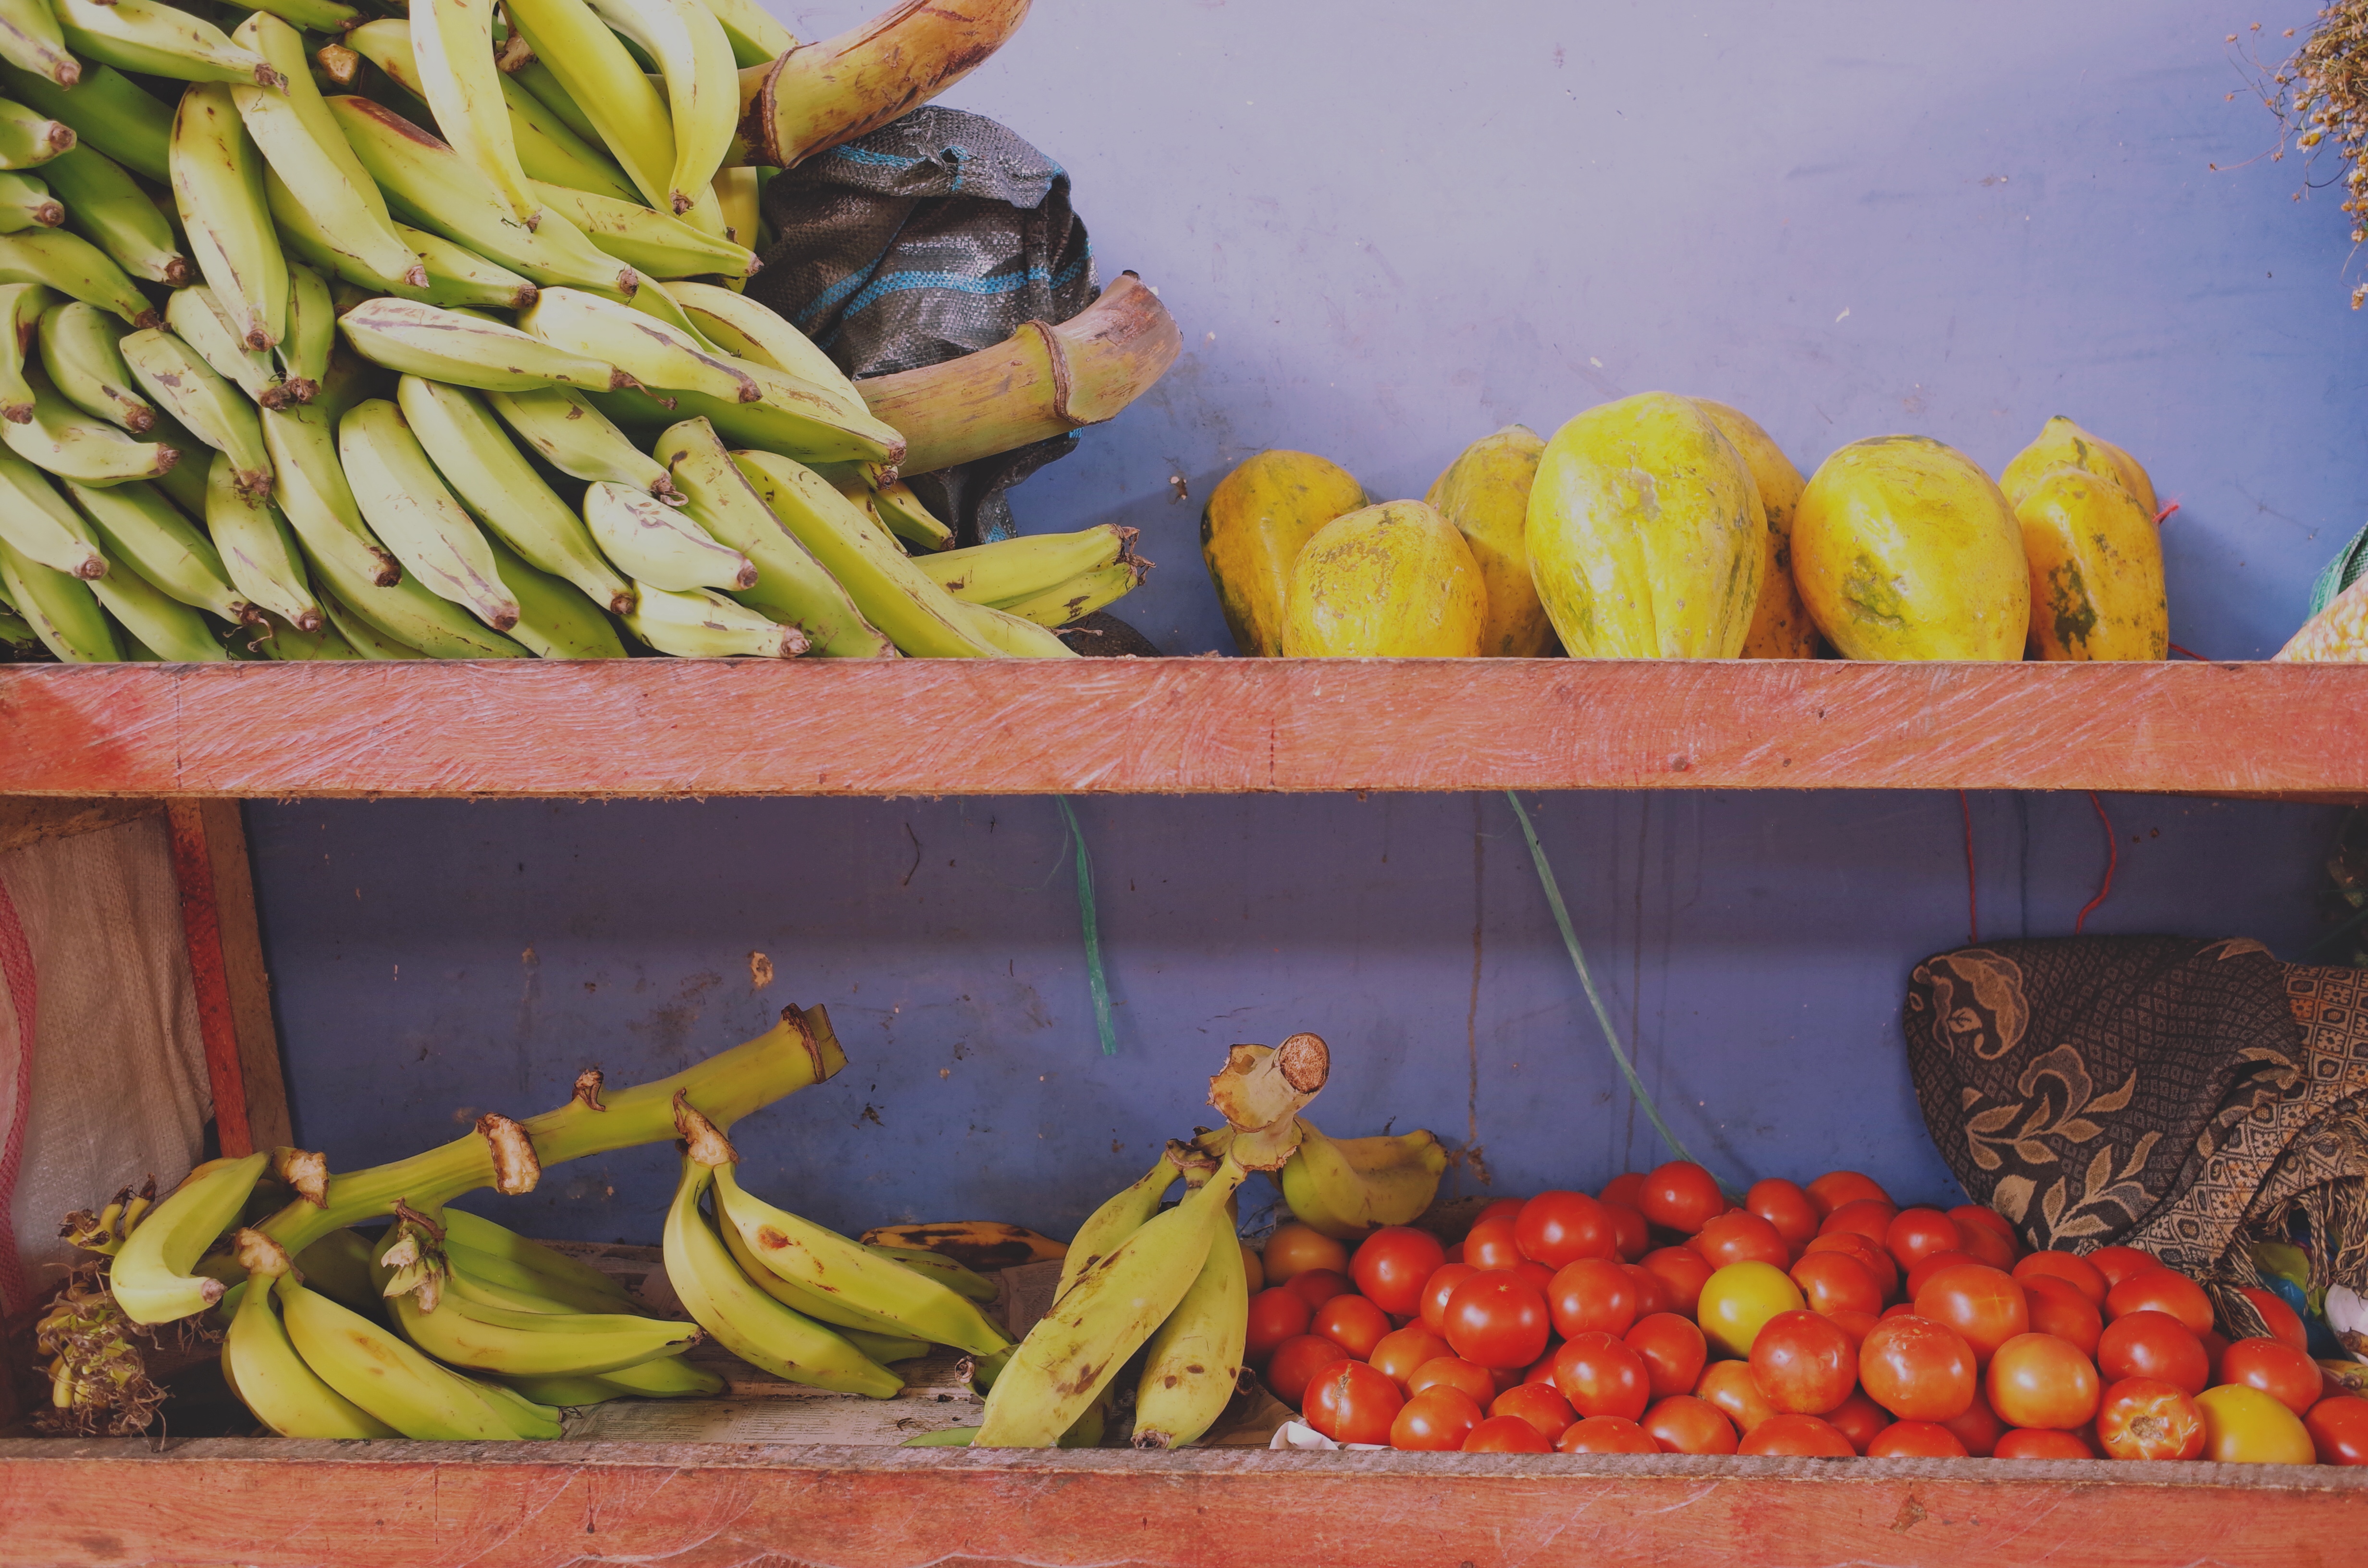 Plantain: finding a home in food